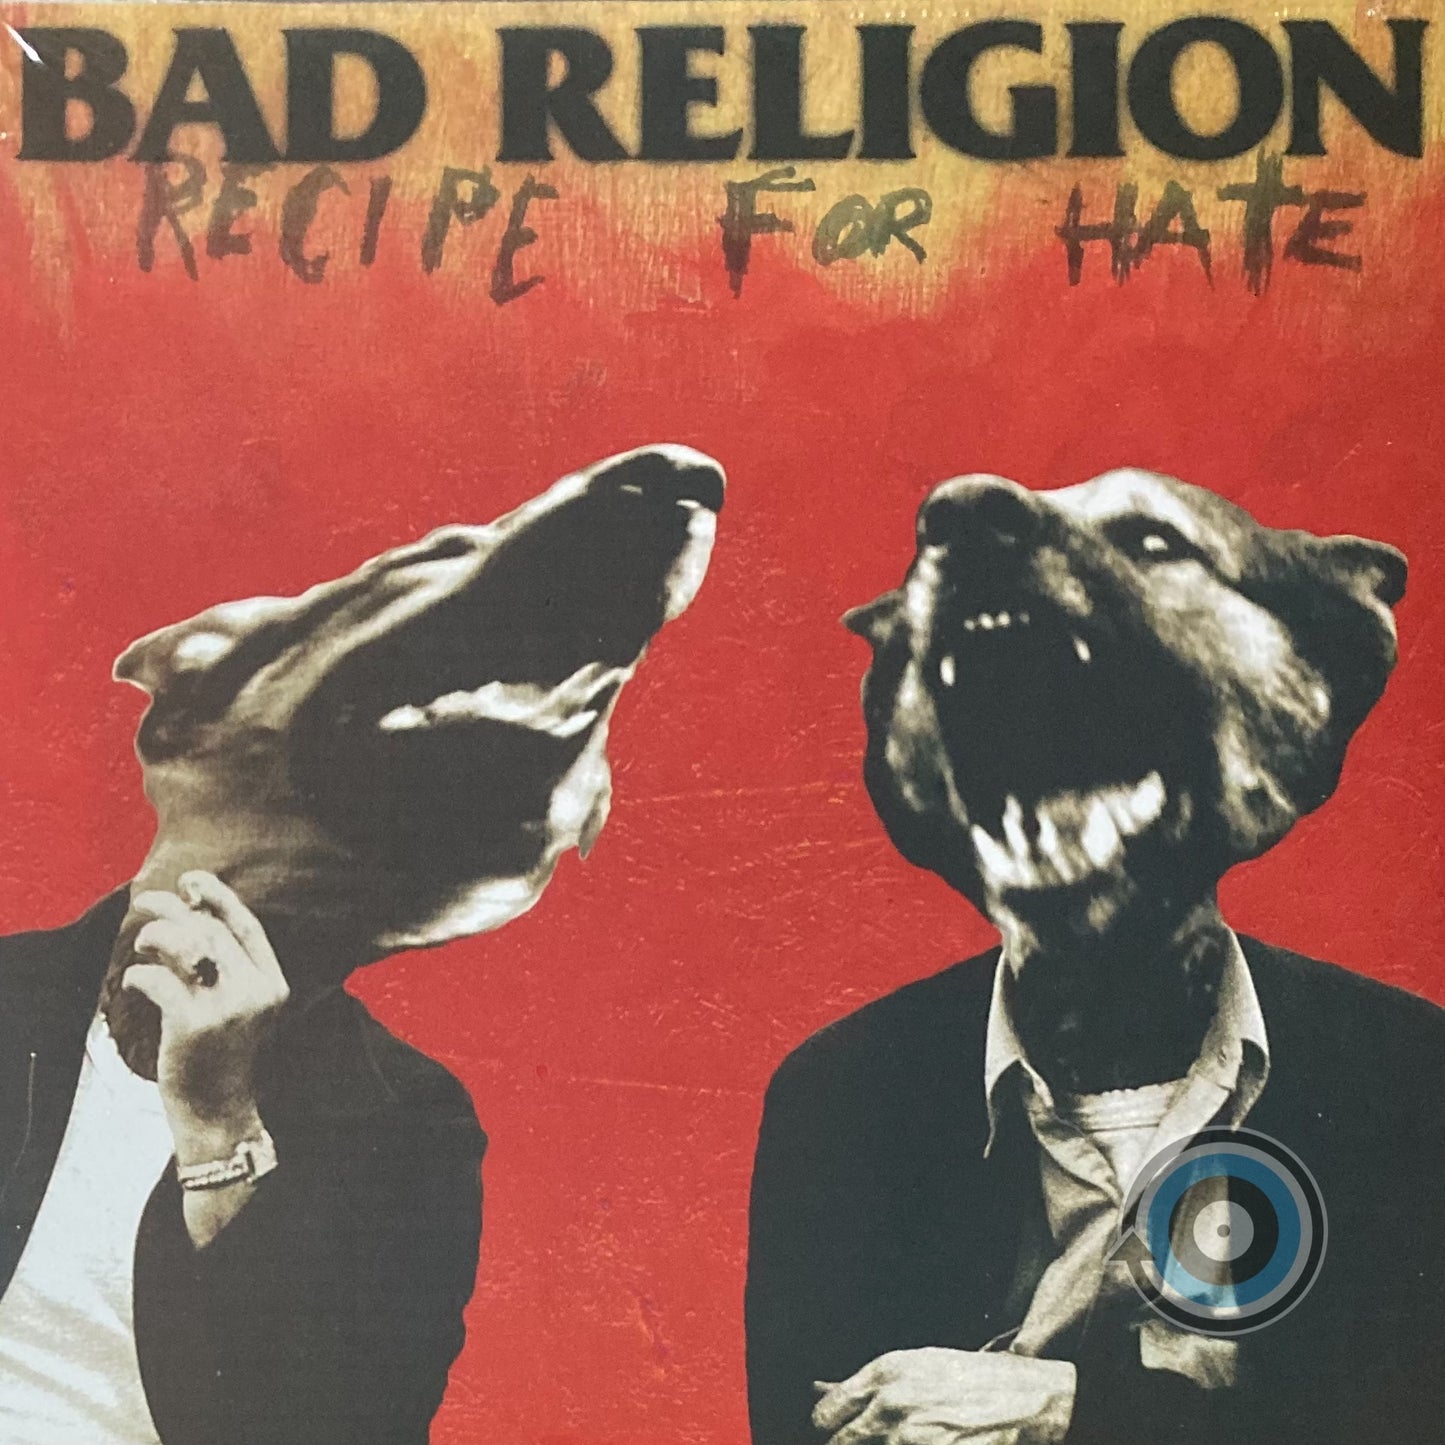 Bad Religion - Recipe For Hate LP (Sealed)